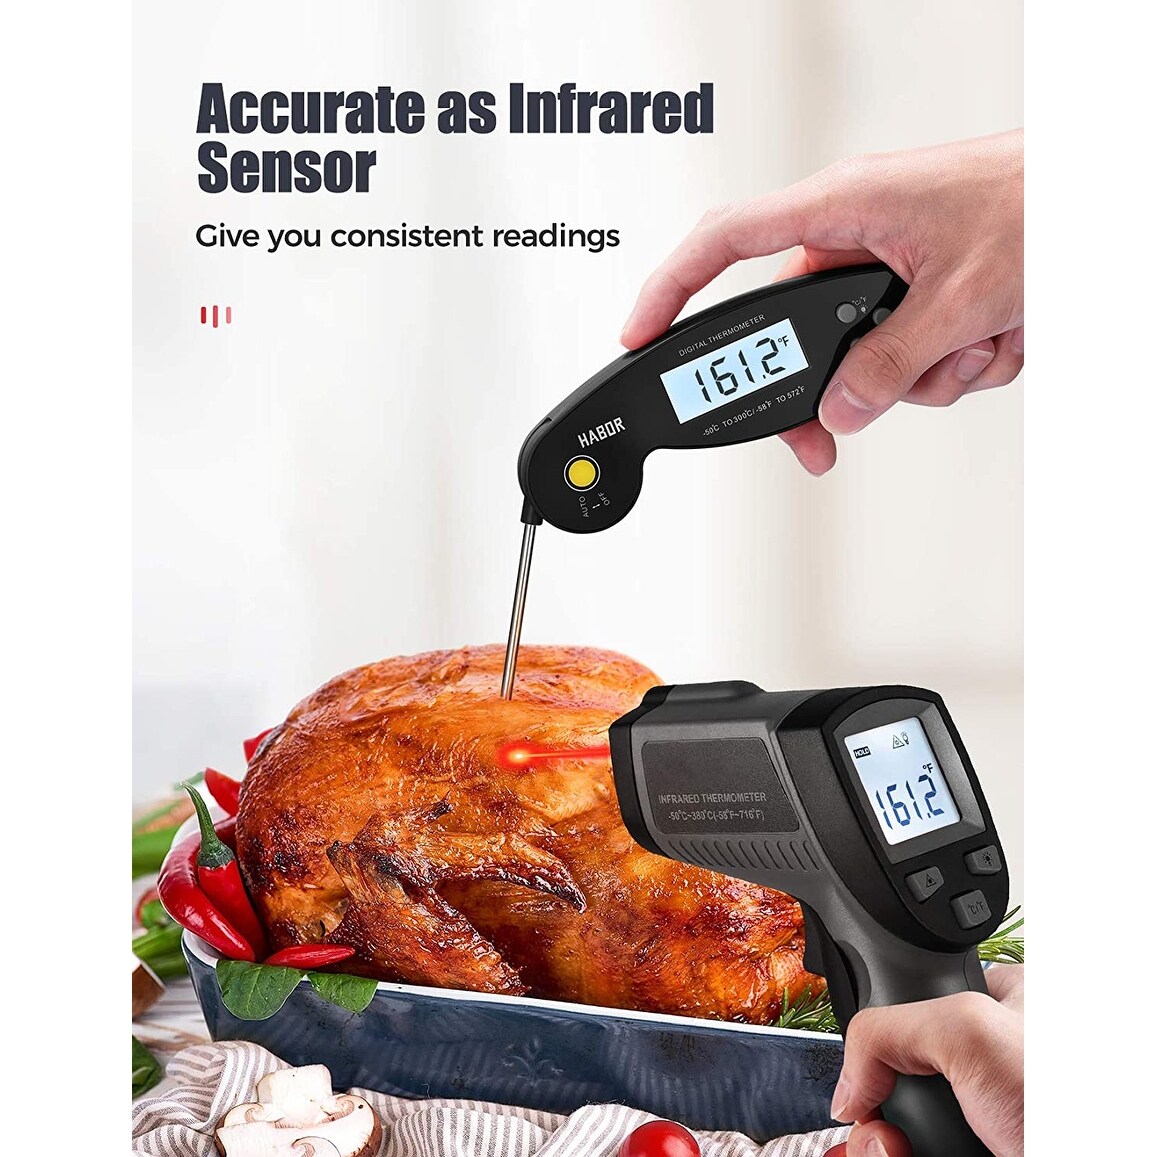 HABOR Meat Thermometer Digital Cooking Thermometer